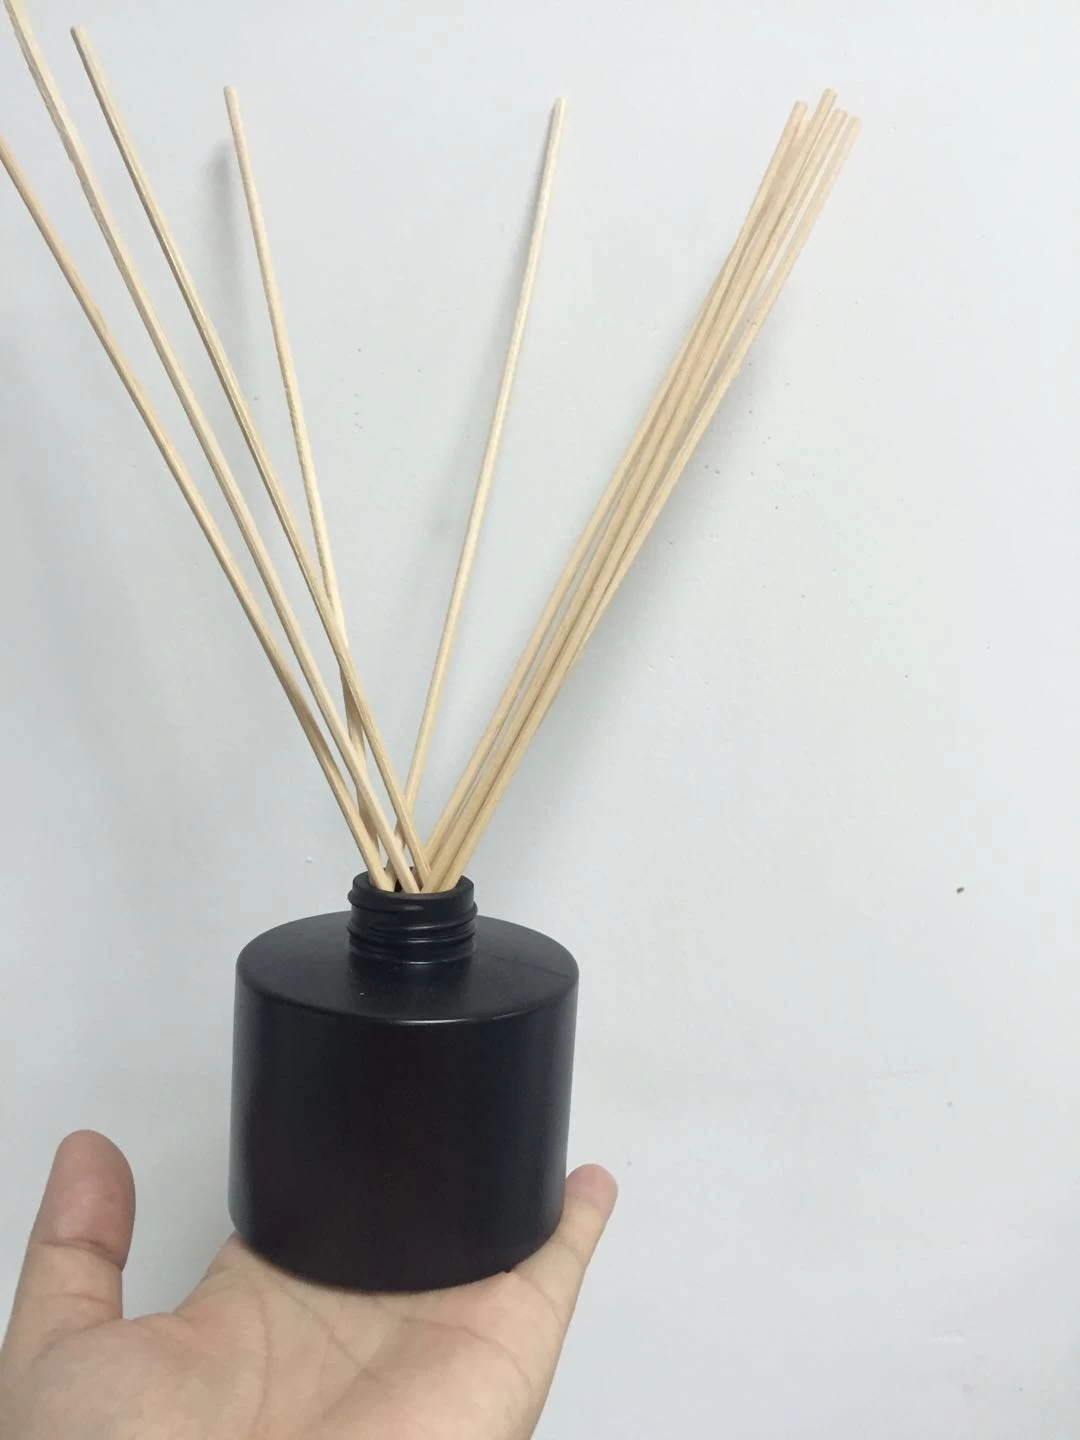 120ml reed diffuser bottle in stock